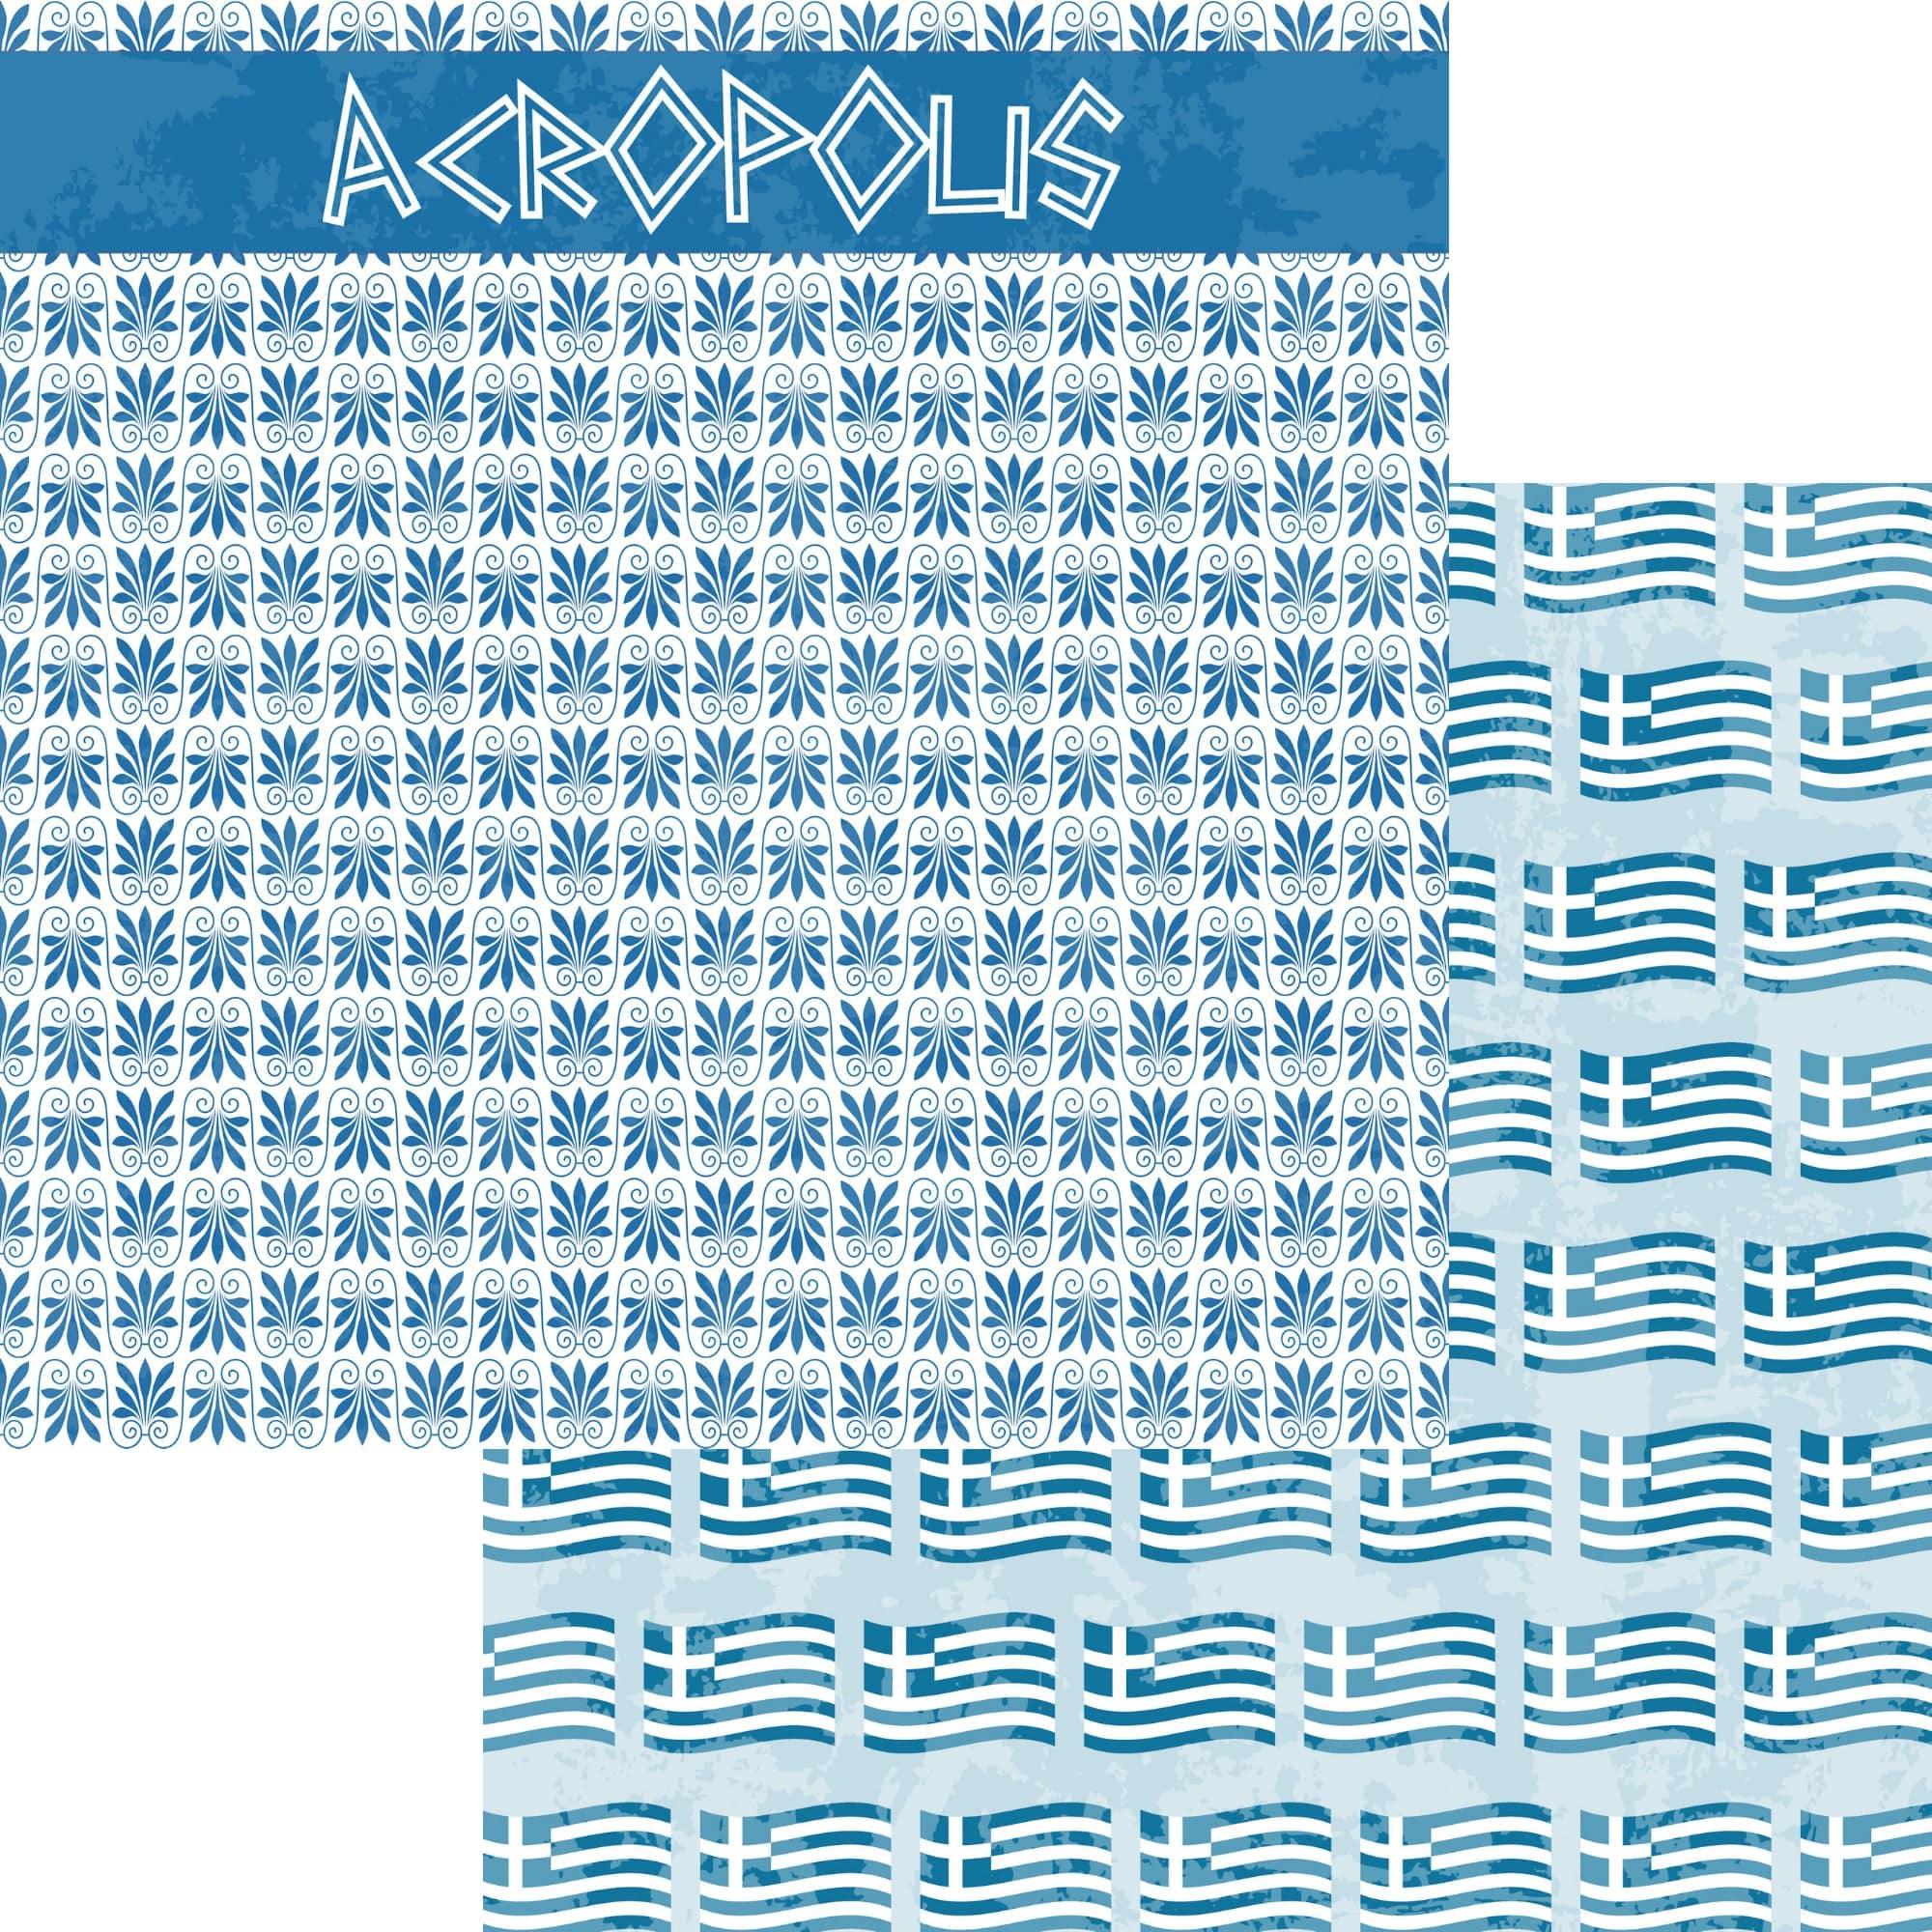 Greece Collection Acropolis 12 x 12 Double-Sided Scrapbook Paper by SSC Designs